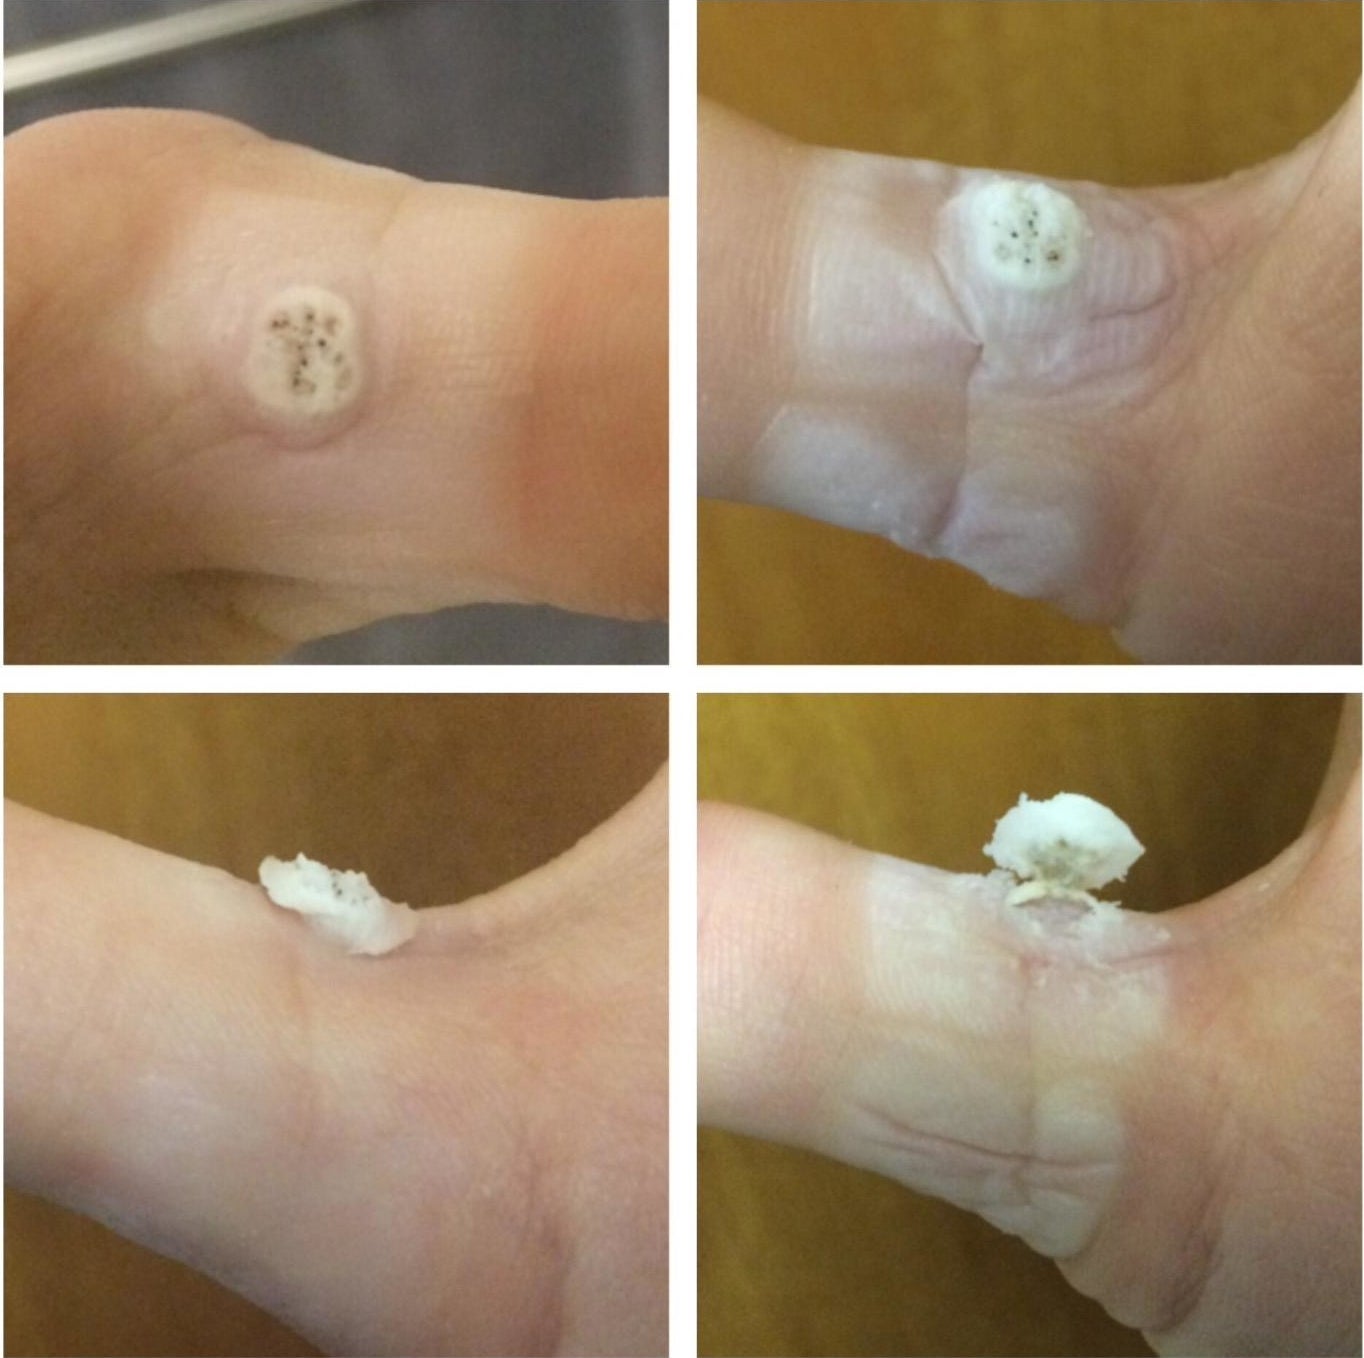 four images of a reviewer's wart breaking through the skin and erupting outward